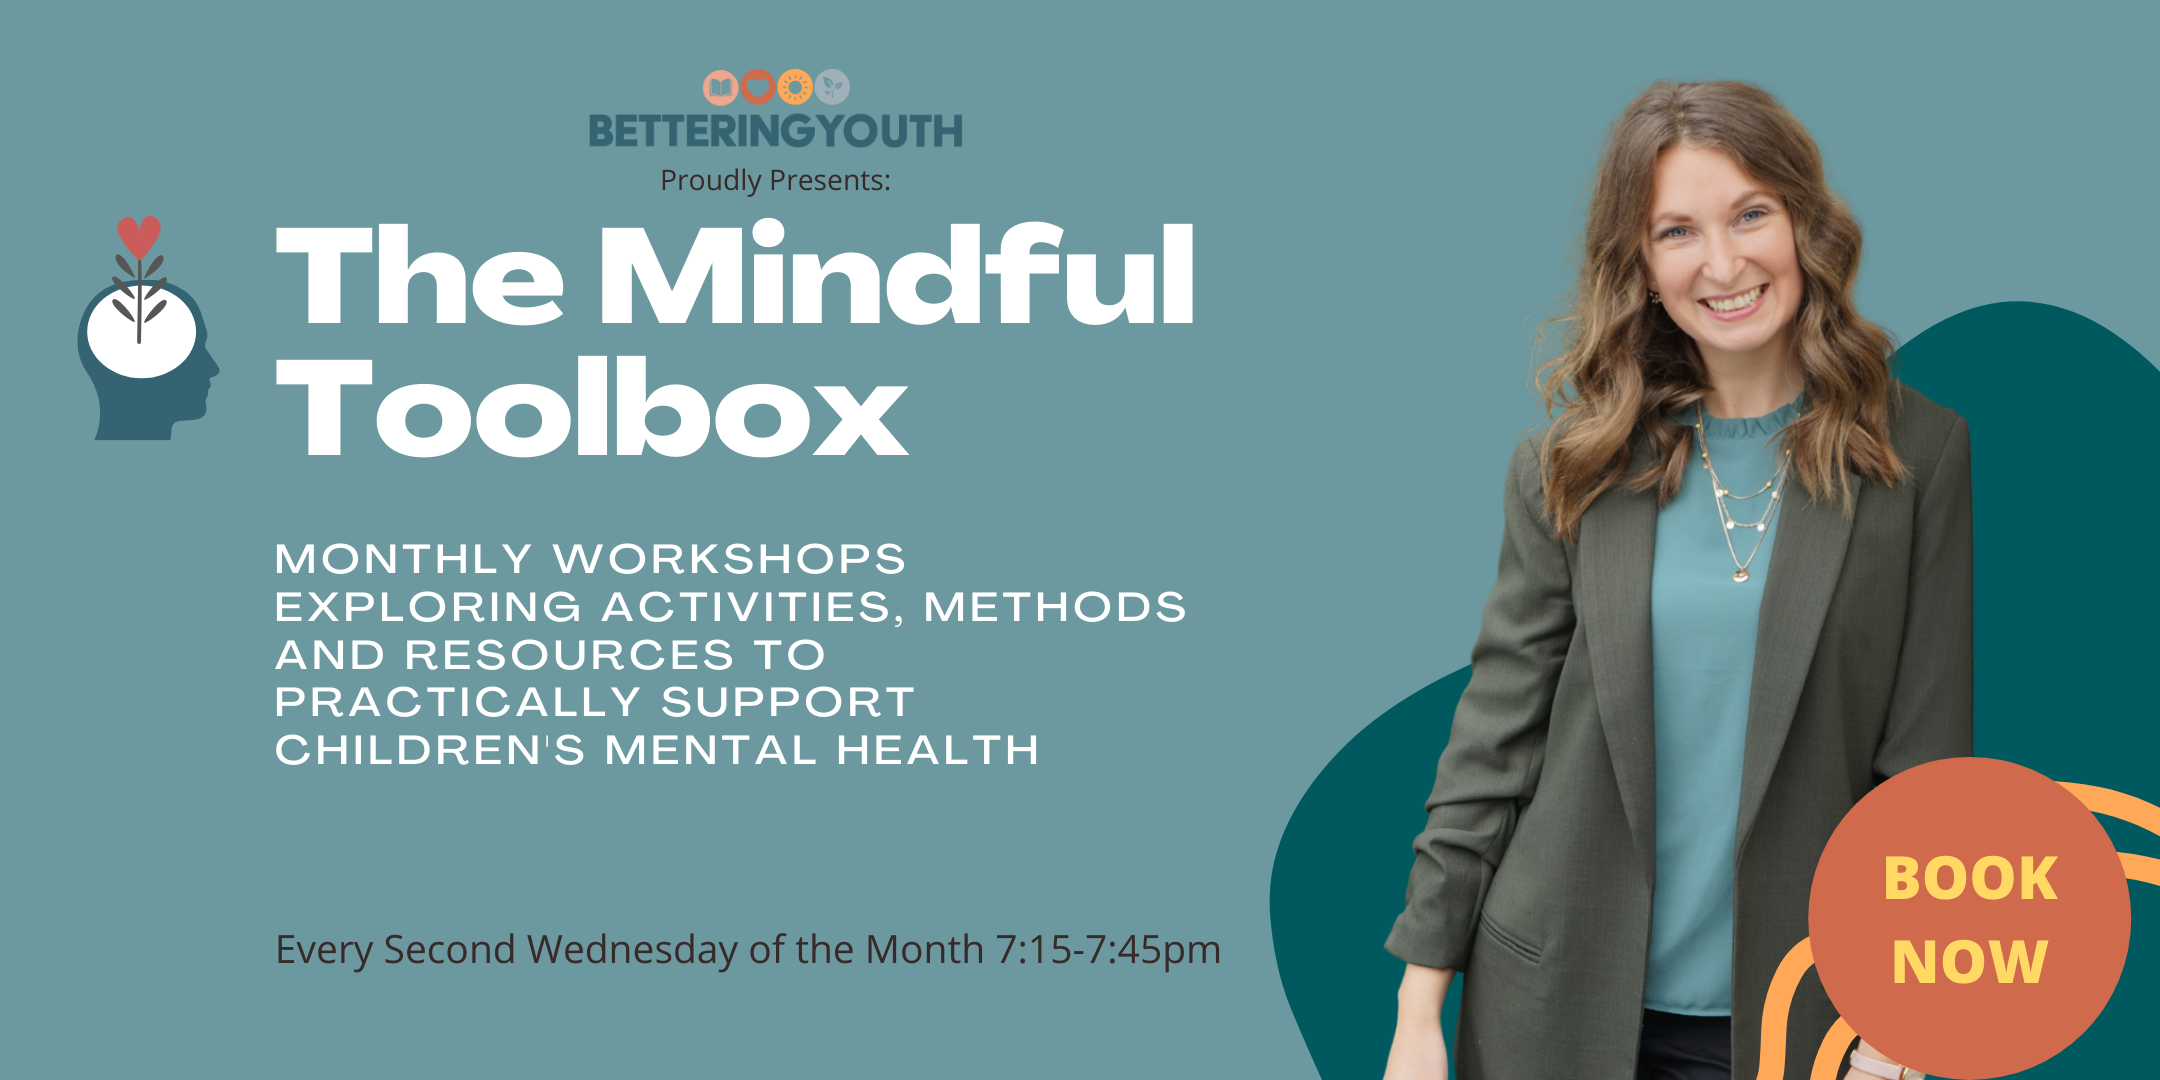 The Mindful Toolbox